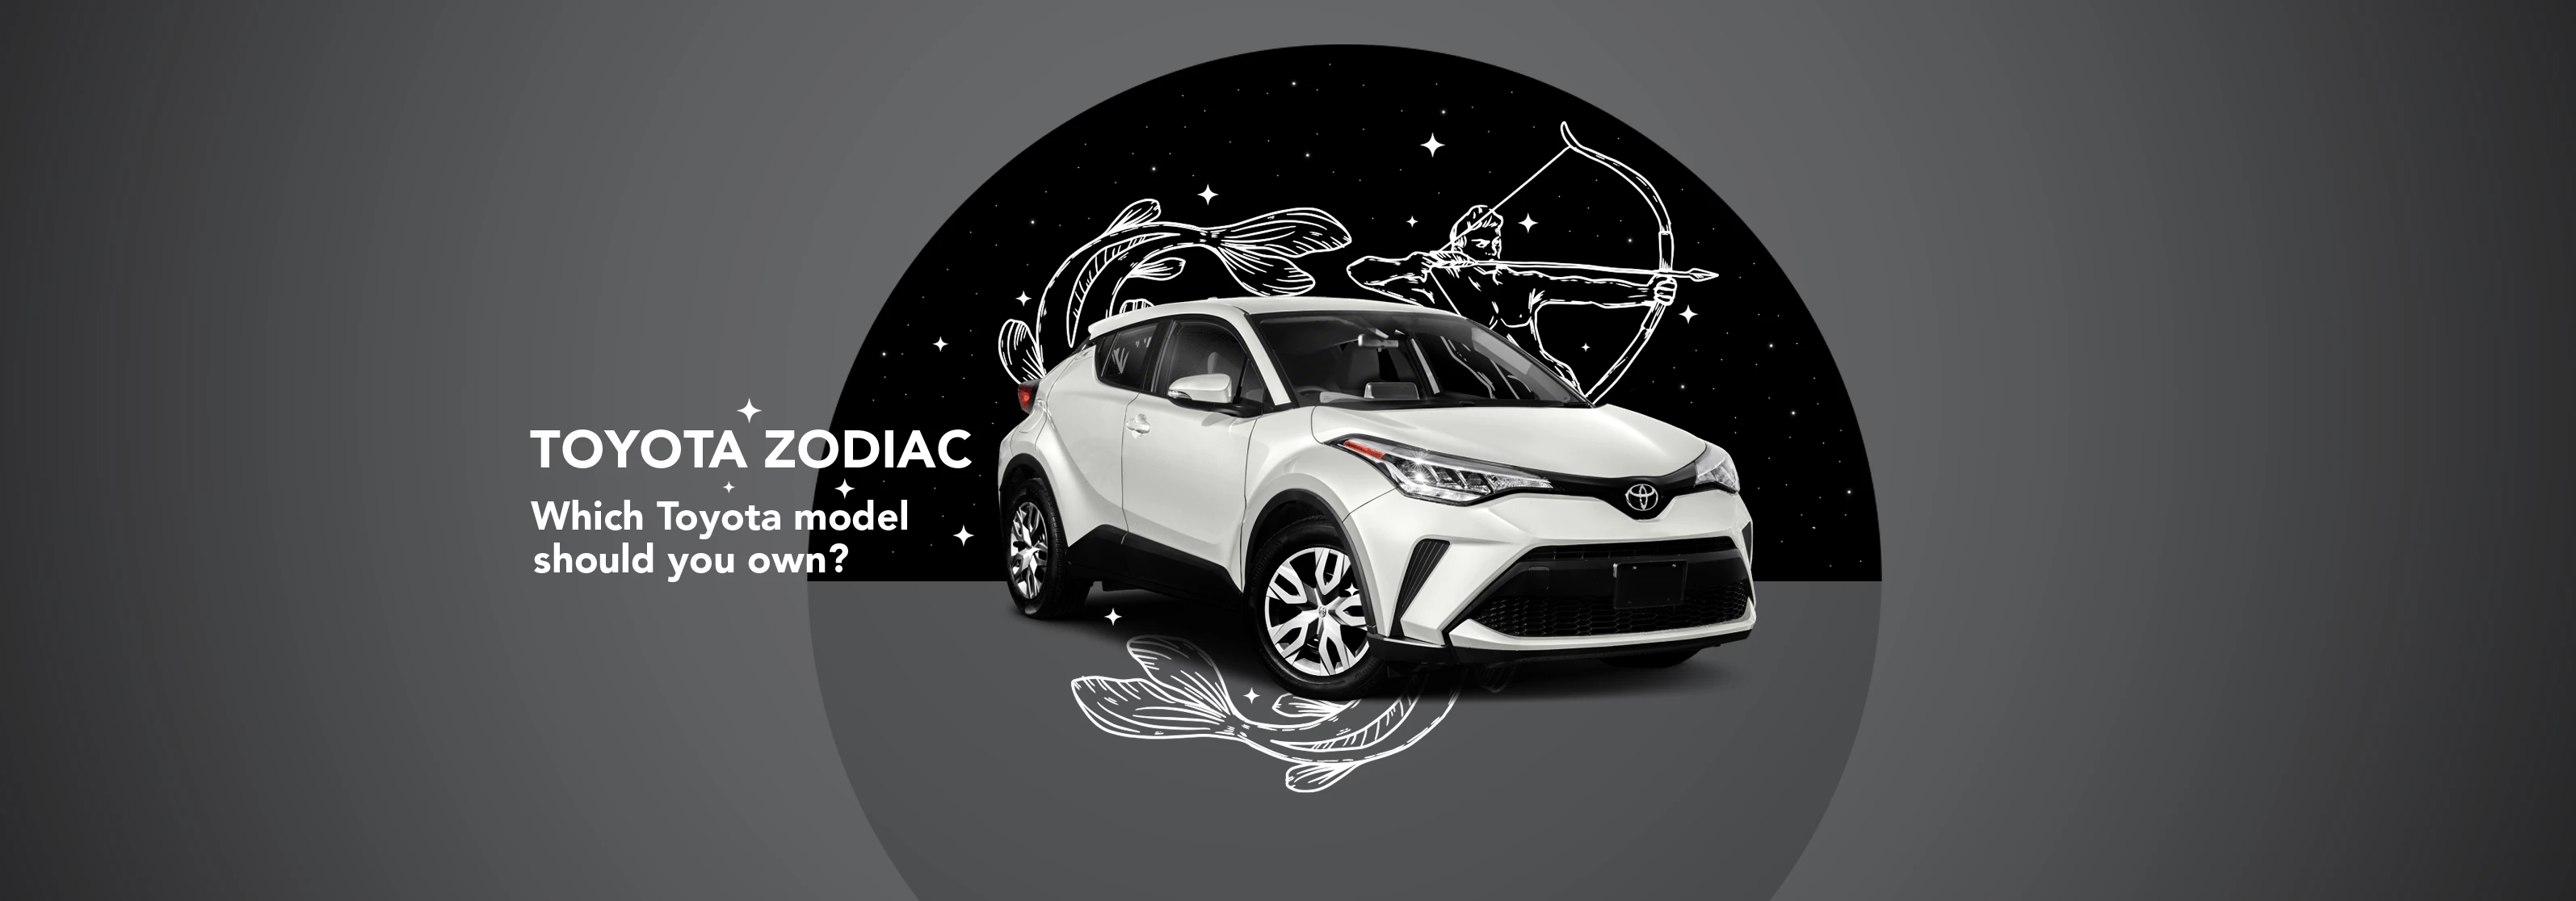 News Landing Image Toyota Zodiac: which Toyota model should you own?